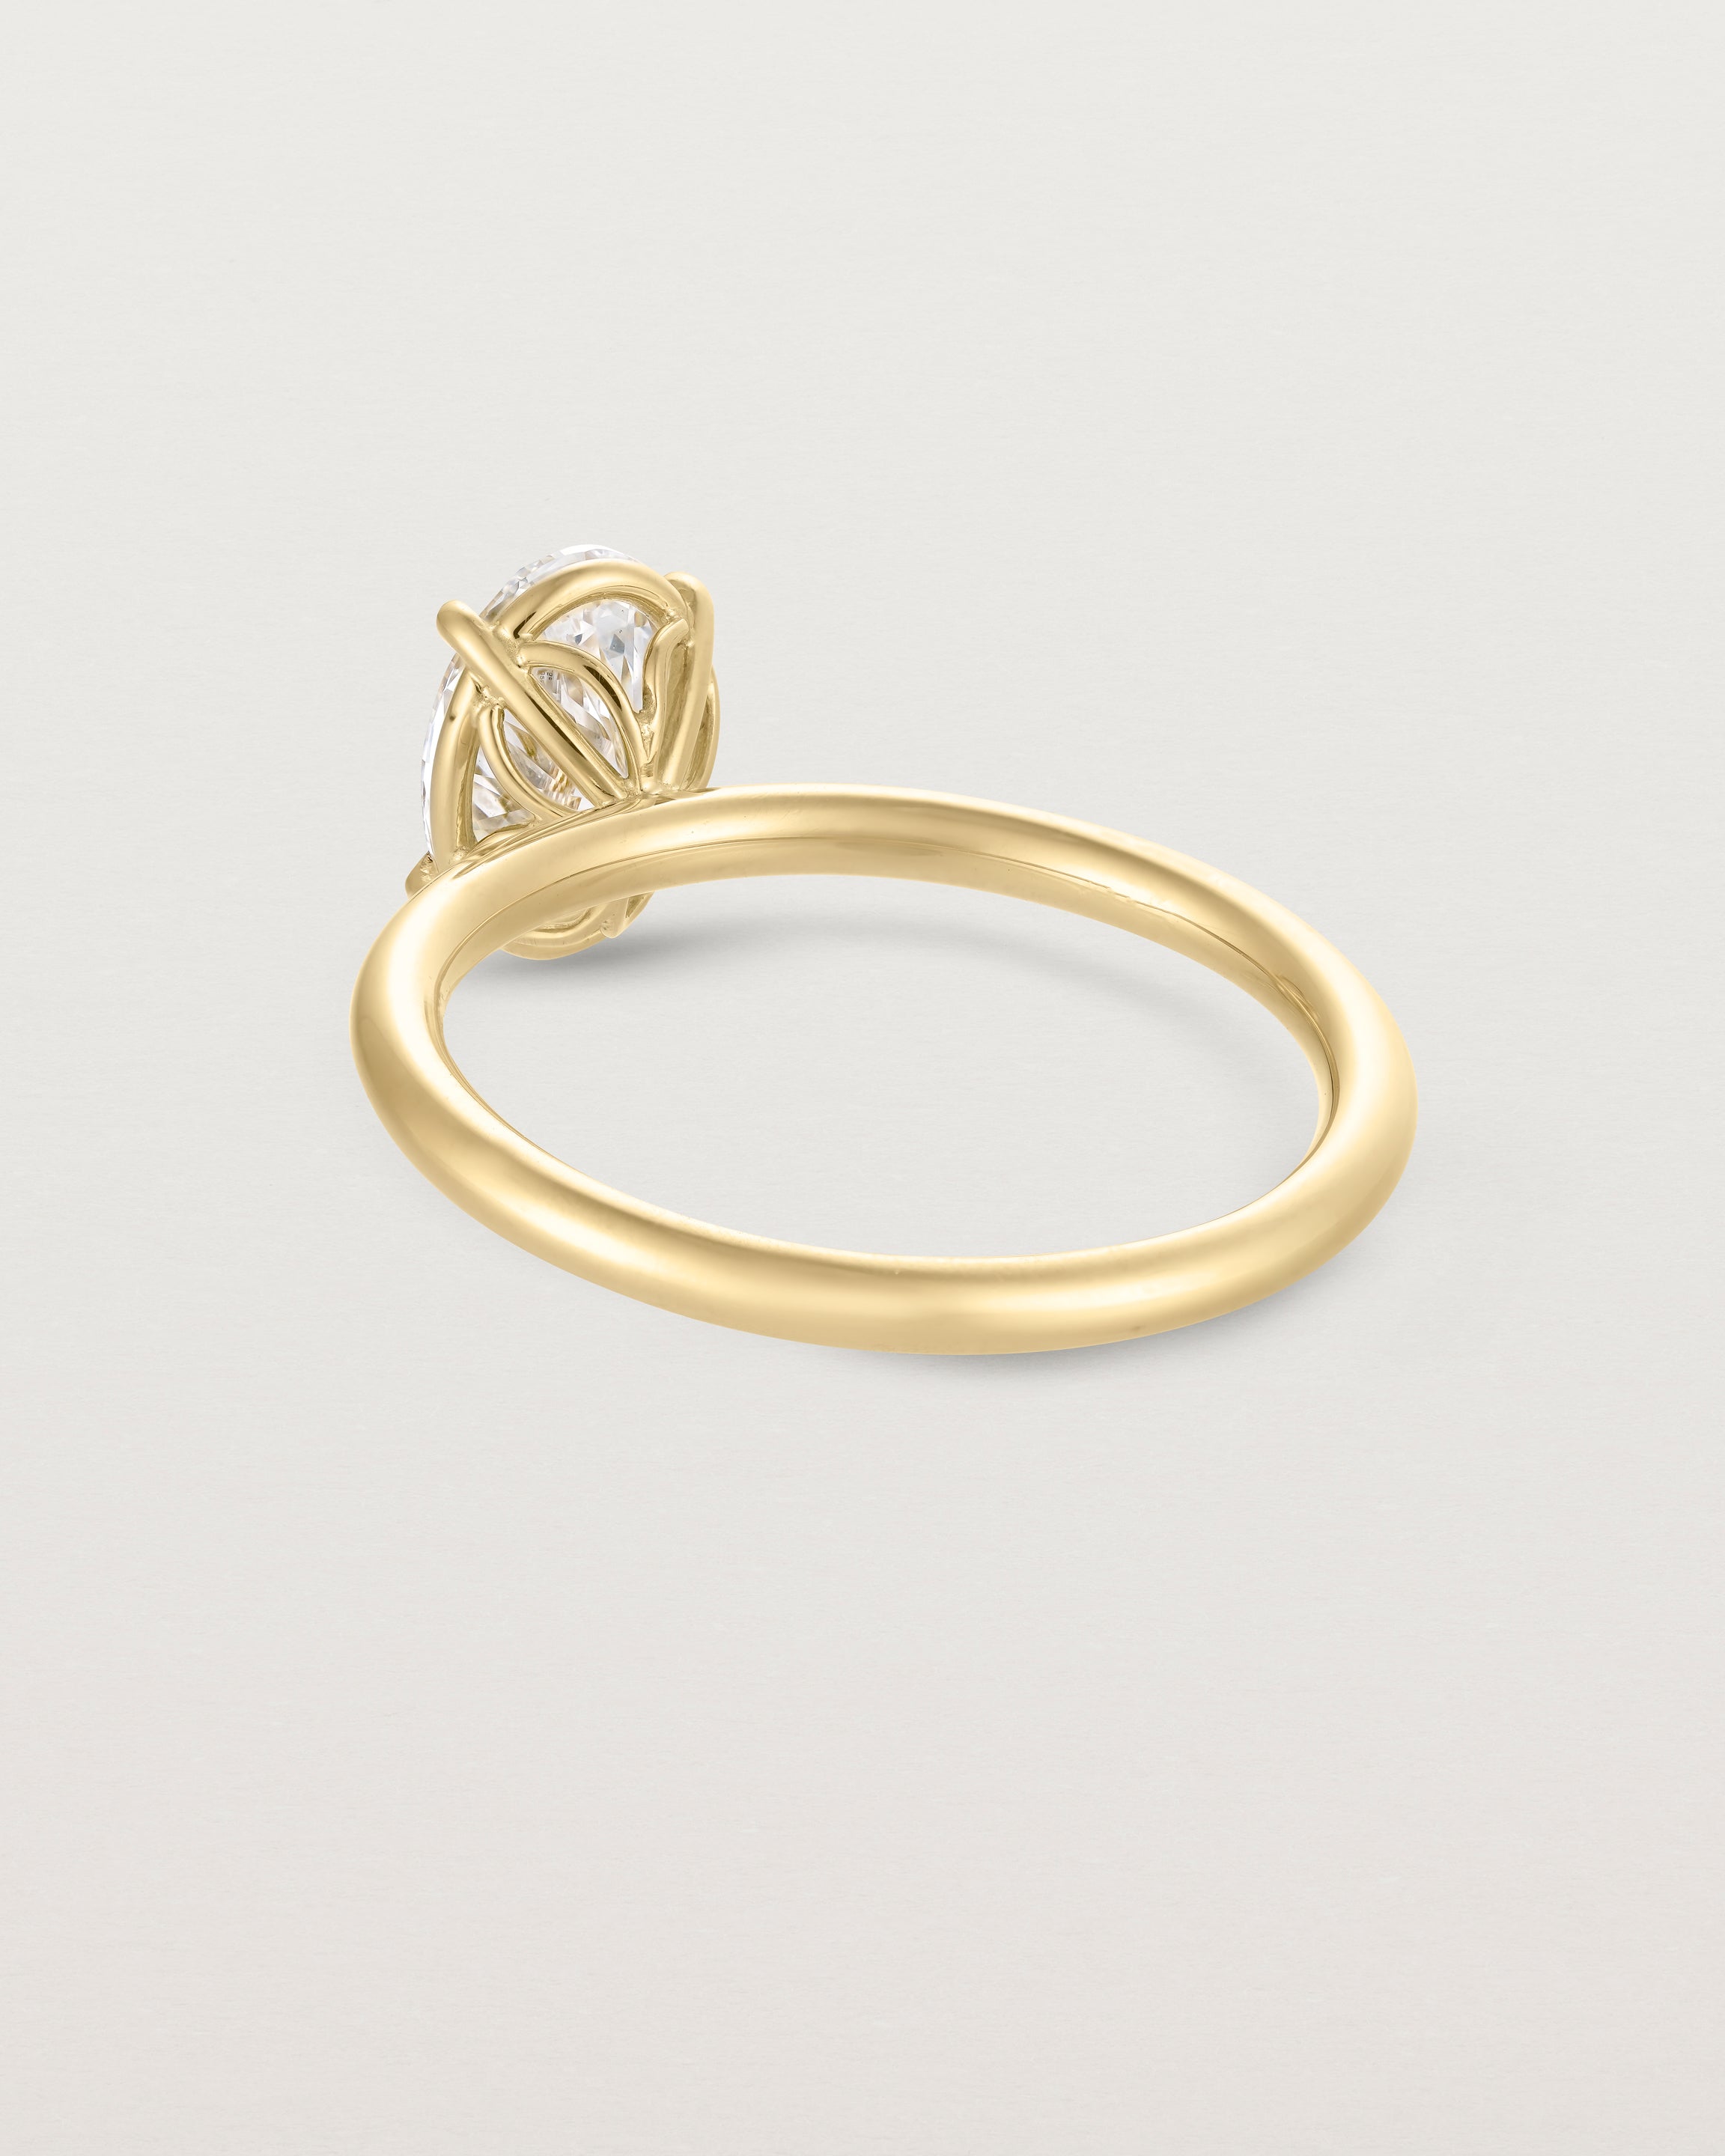 Back view of the No. 112 Signature Solitaire | Laboratory Grown Diamond in yellow gold.